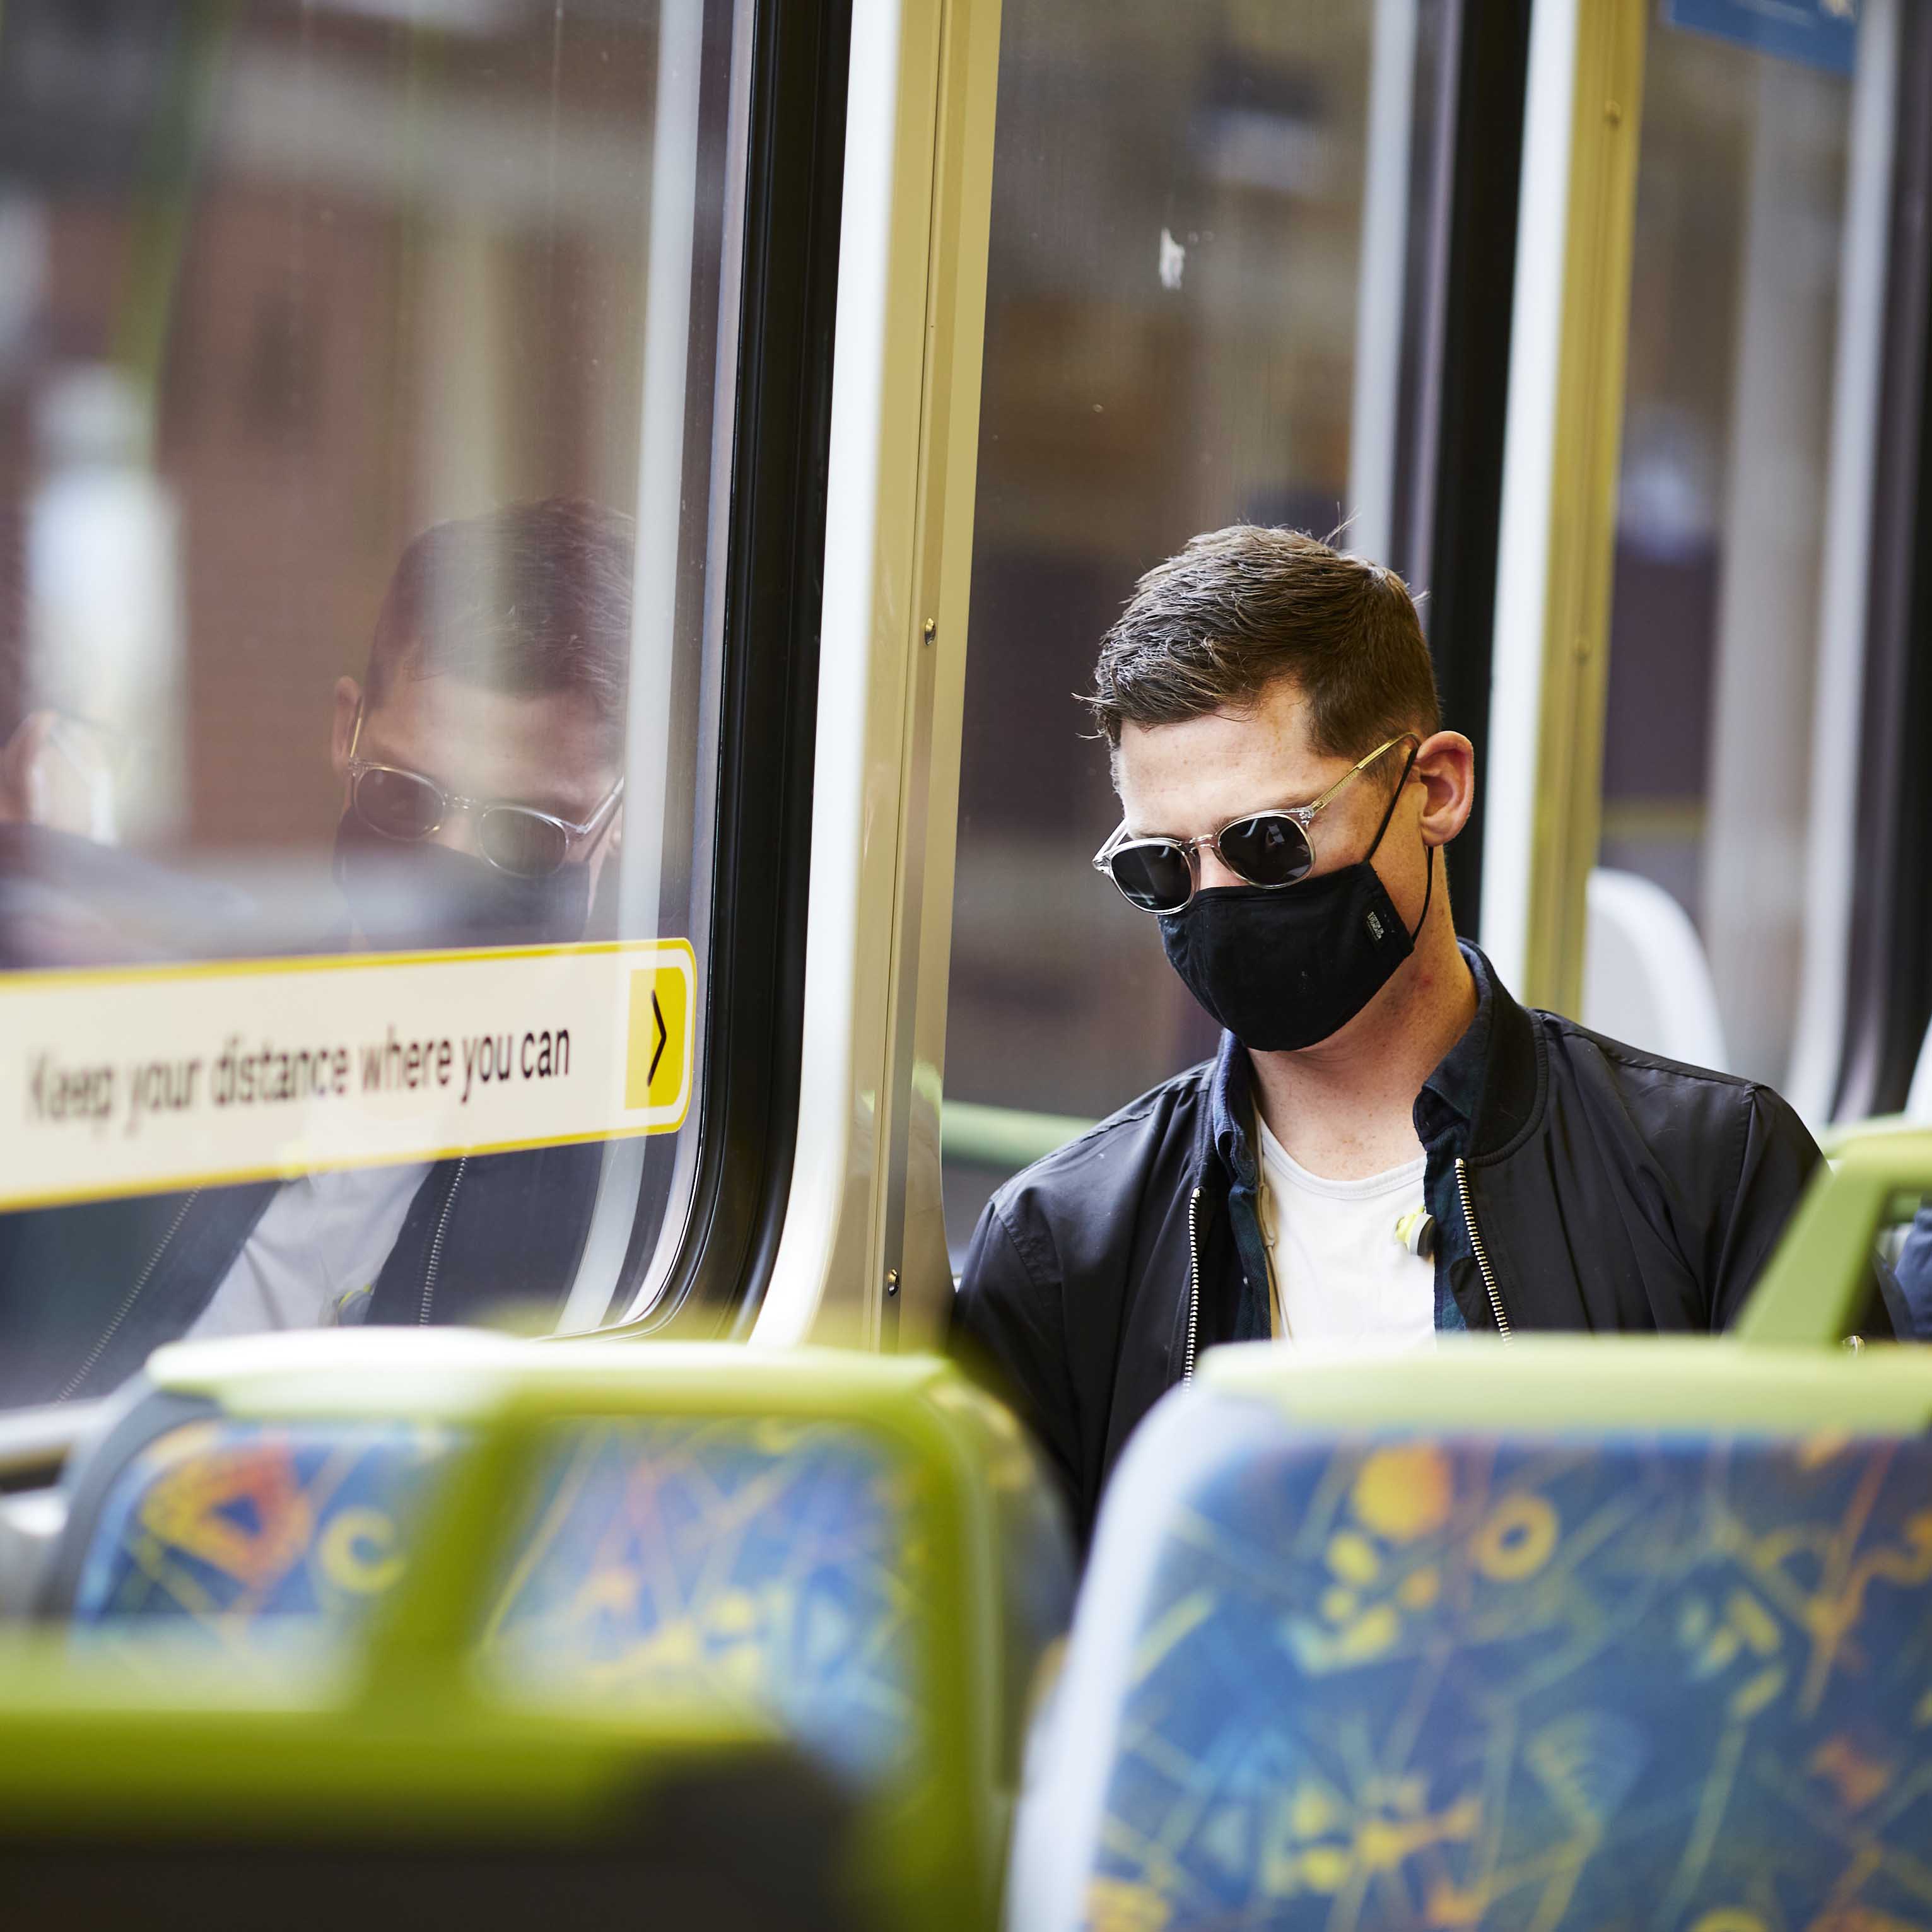 Image is a photograph of a passenger wearing a face mask while travelling on a Metro train. The passenger is a young Caucasian male with short brown hair. He is wearing dark sunglasses with clear frames, a black face mask, black leather jacket and a white t-shirt. He is looking down at his phone and leaning against the window of the train carriage. A blurred station platform is visible through the window.